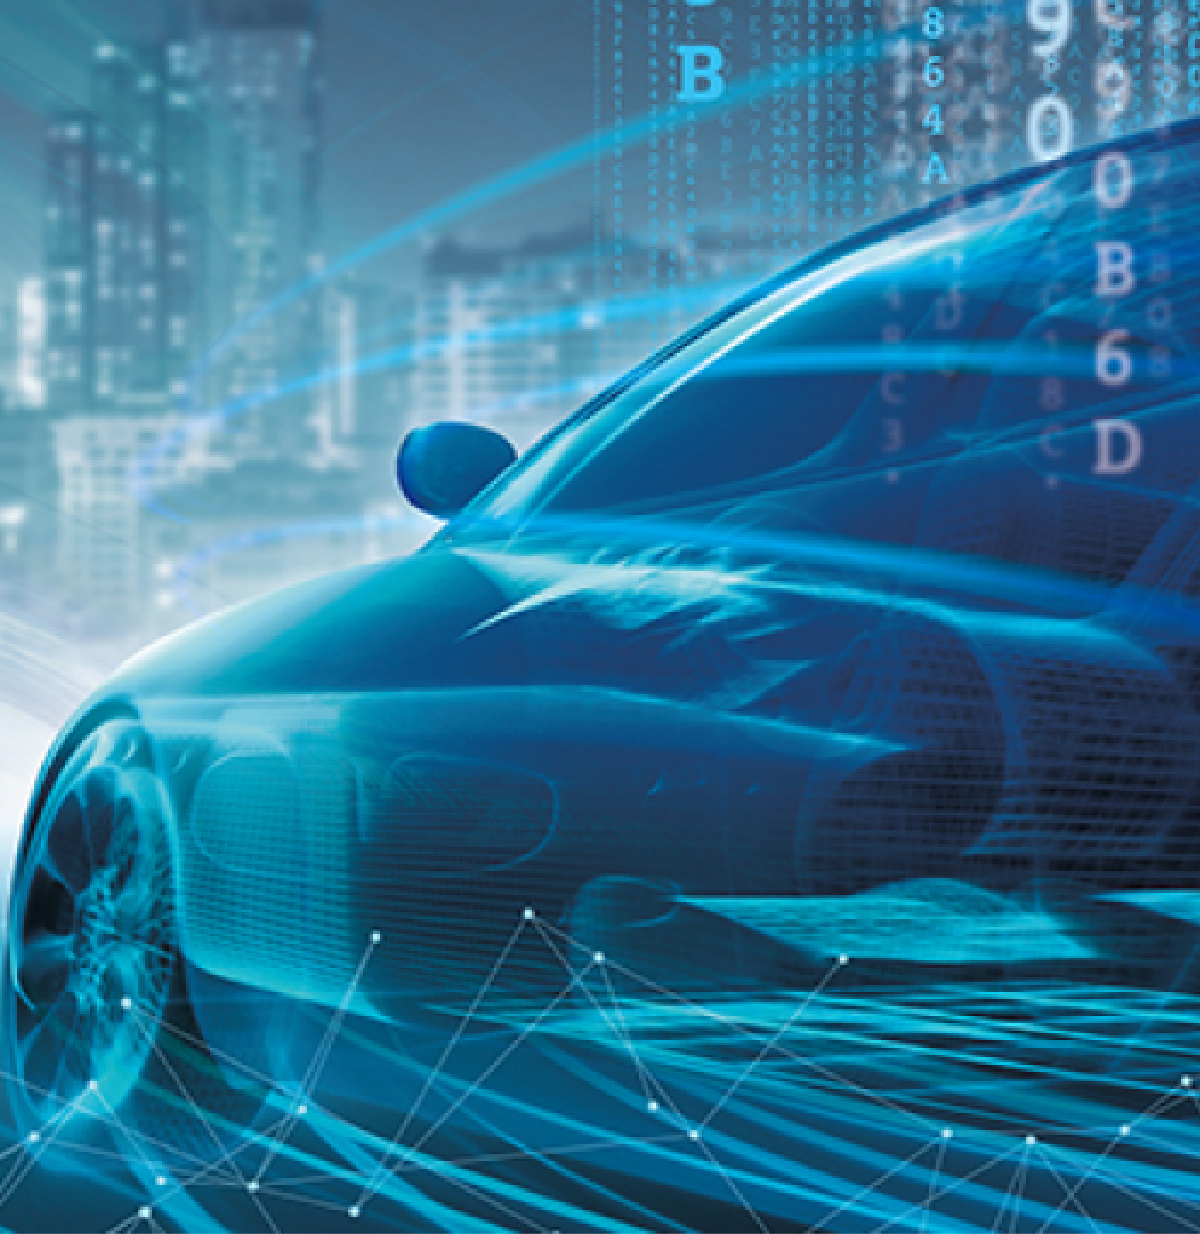 Revolutionize the Road with Digital Transformation